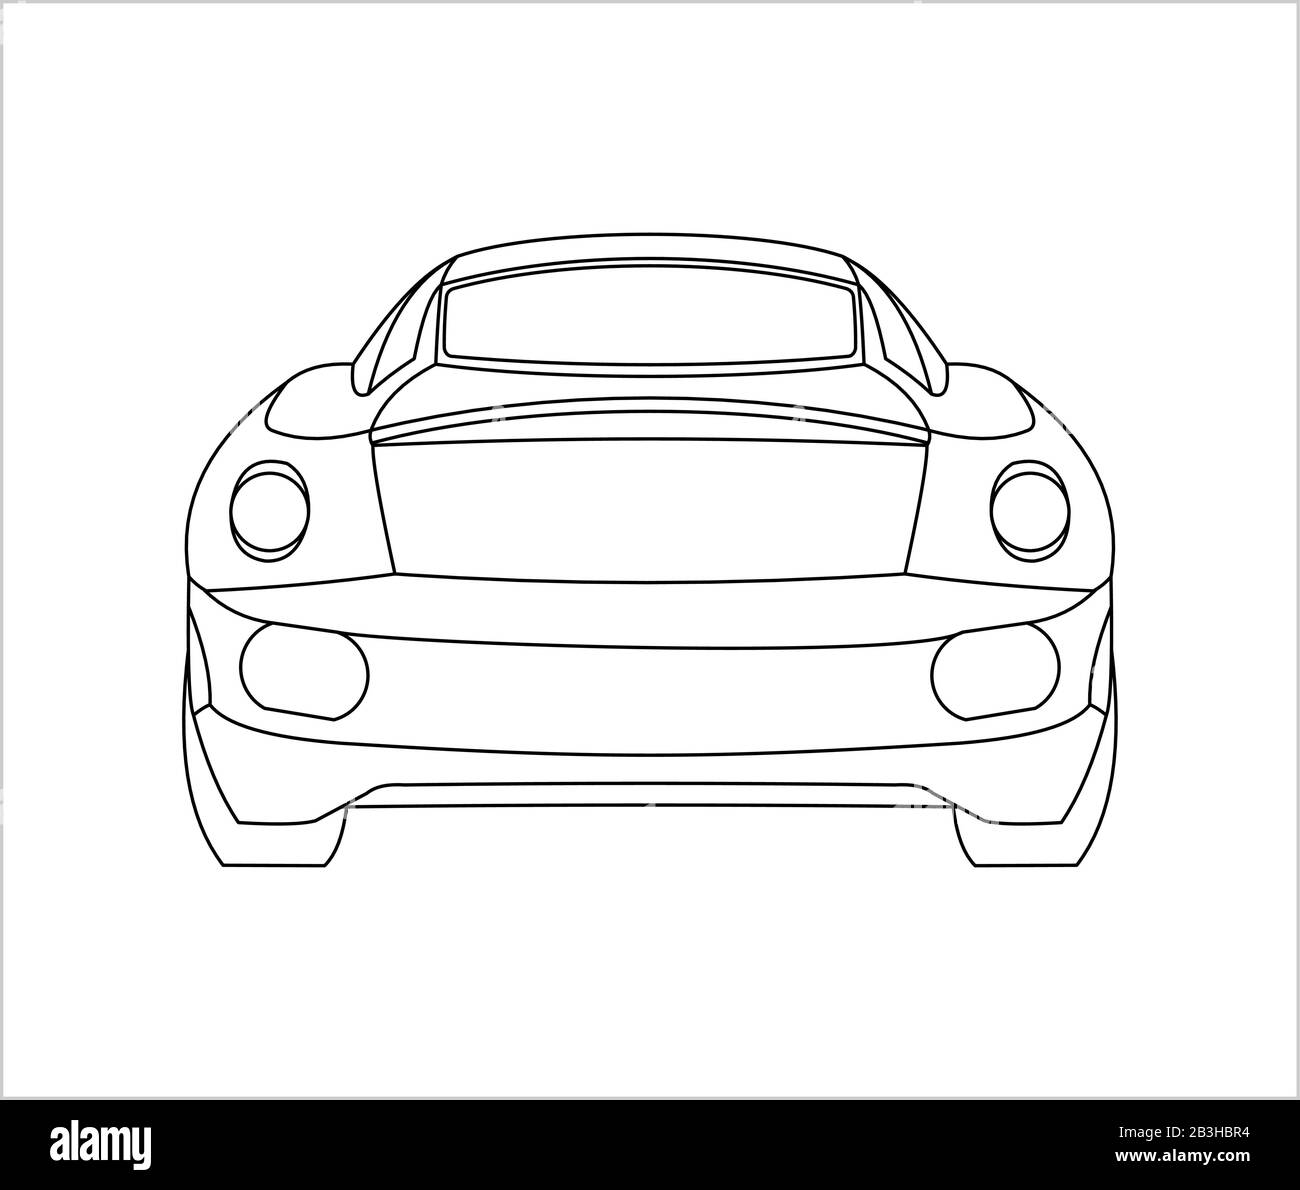 Outline Car Coloring Book For kids and adults. Fast Racing Car, Rear view. Modern flat Vector illustration on white background. Stock Vector